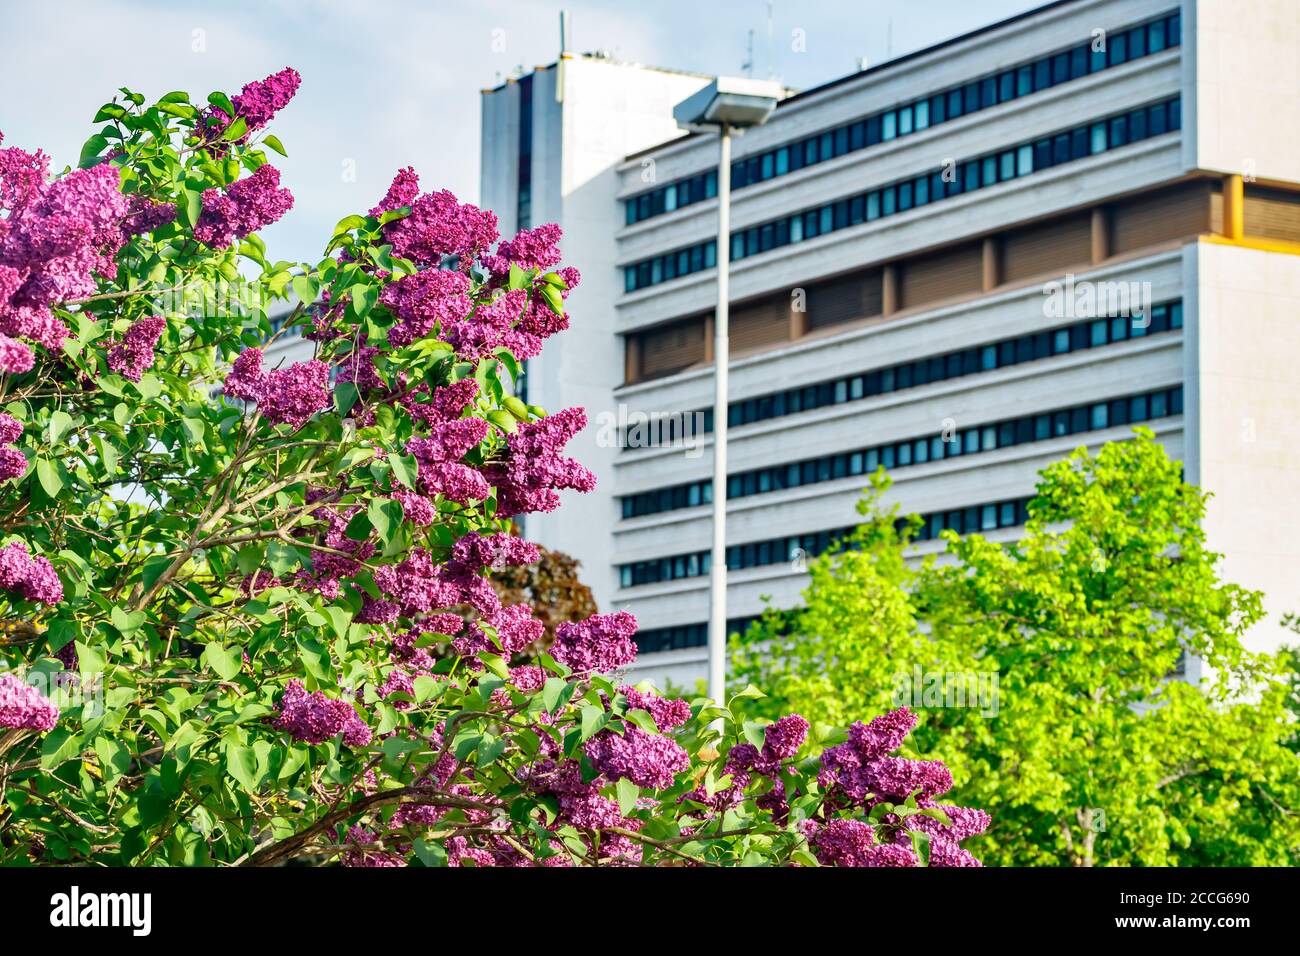 Beautiful lilac purple flowers blooming in the city Stock Photo